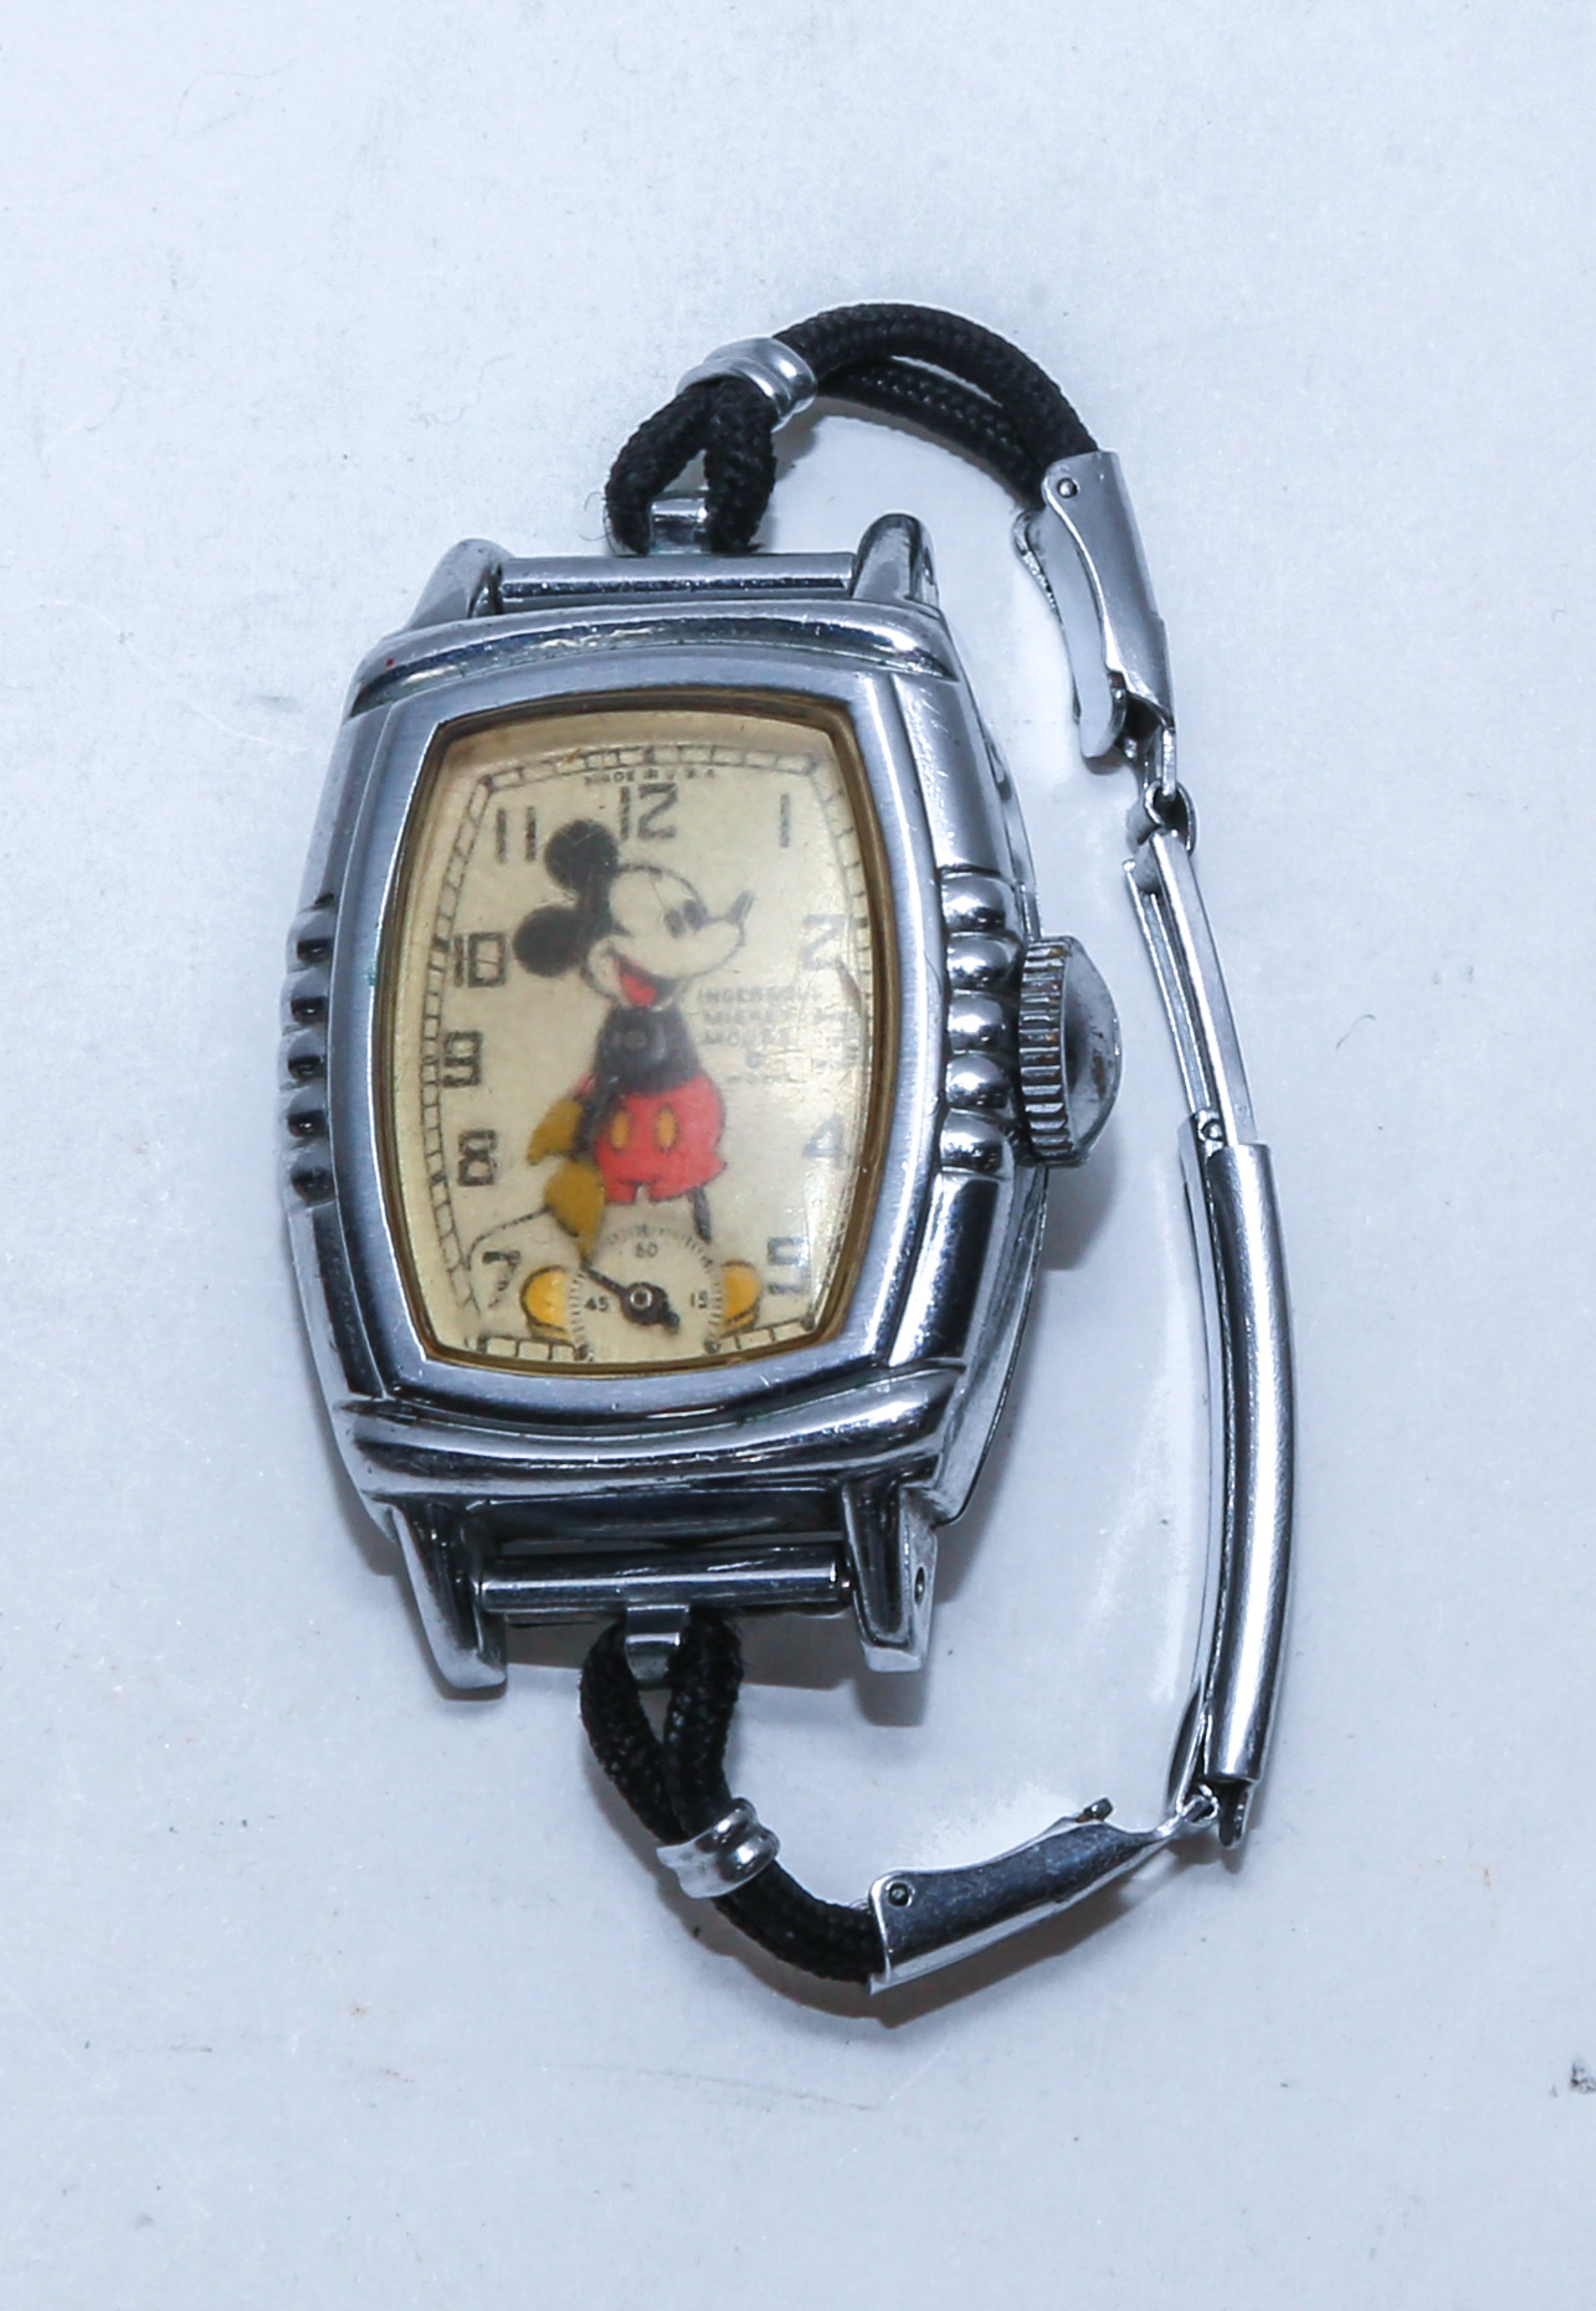 A MICKEY MOUSE WATCH BY INGERSOLL .